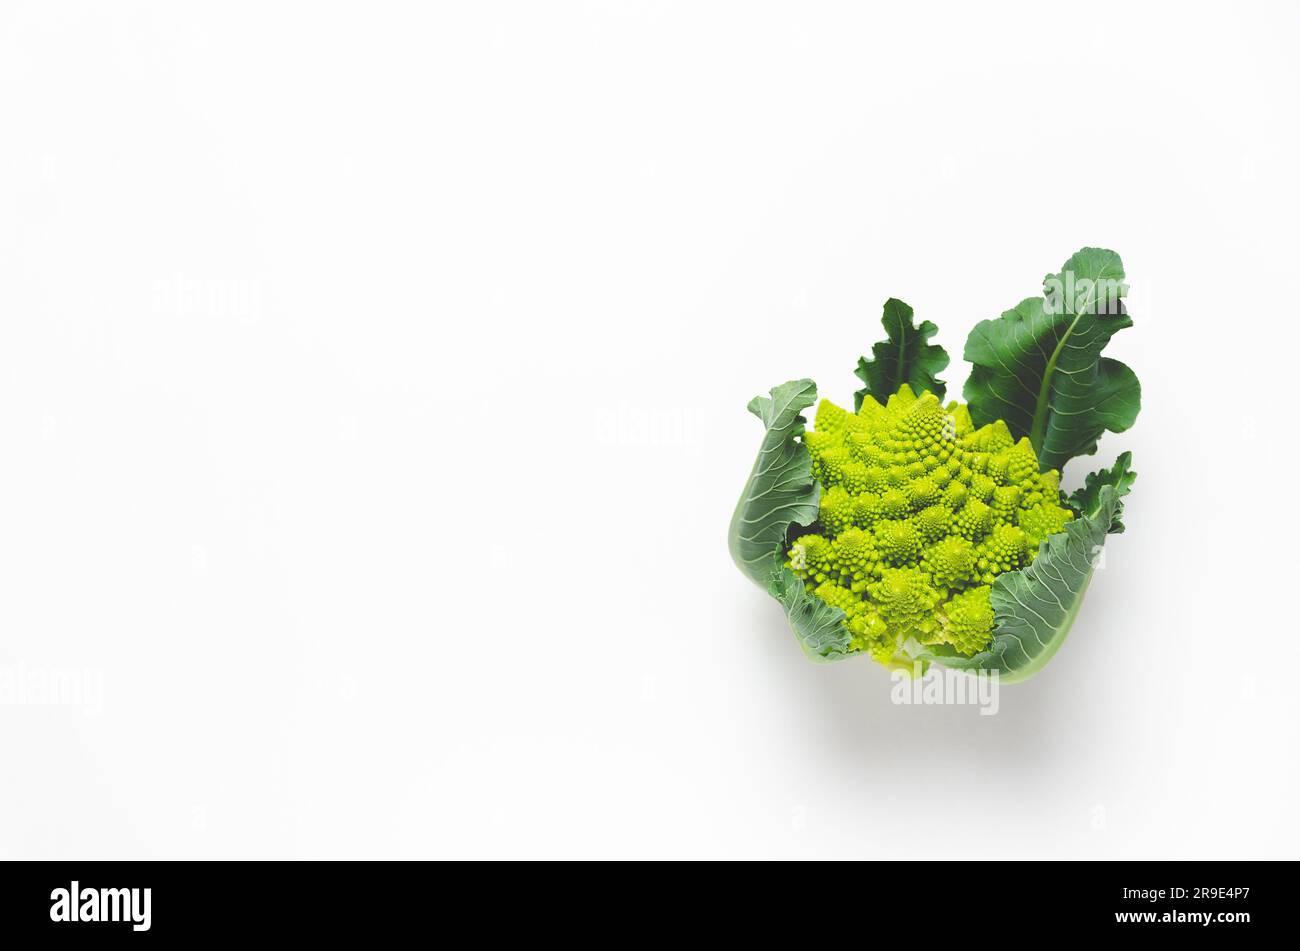 Romanesco broccoli with leaves on white background with copy space. Stock Photo